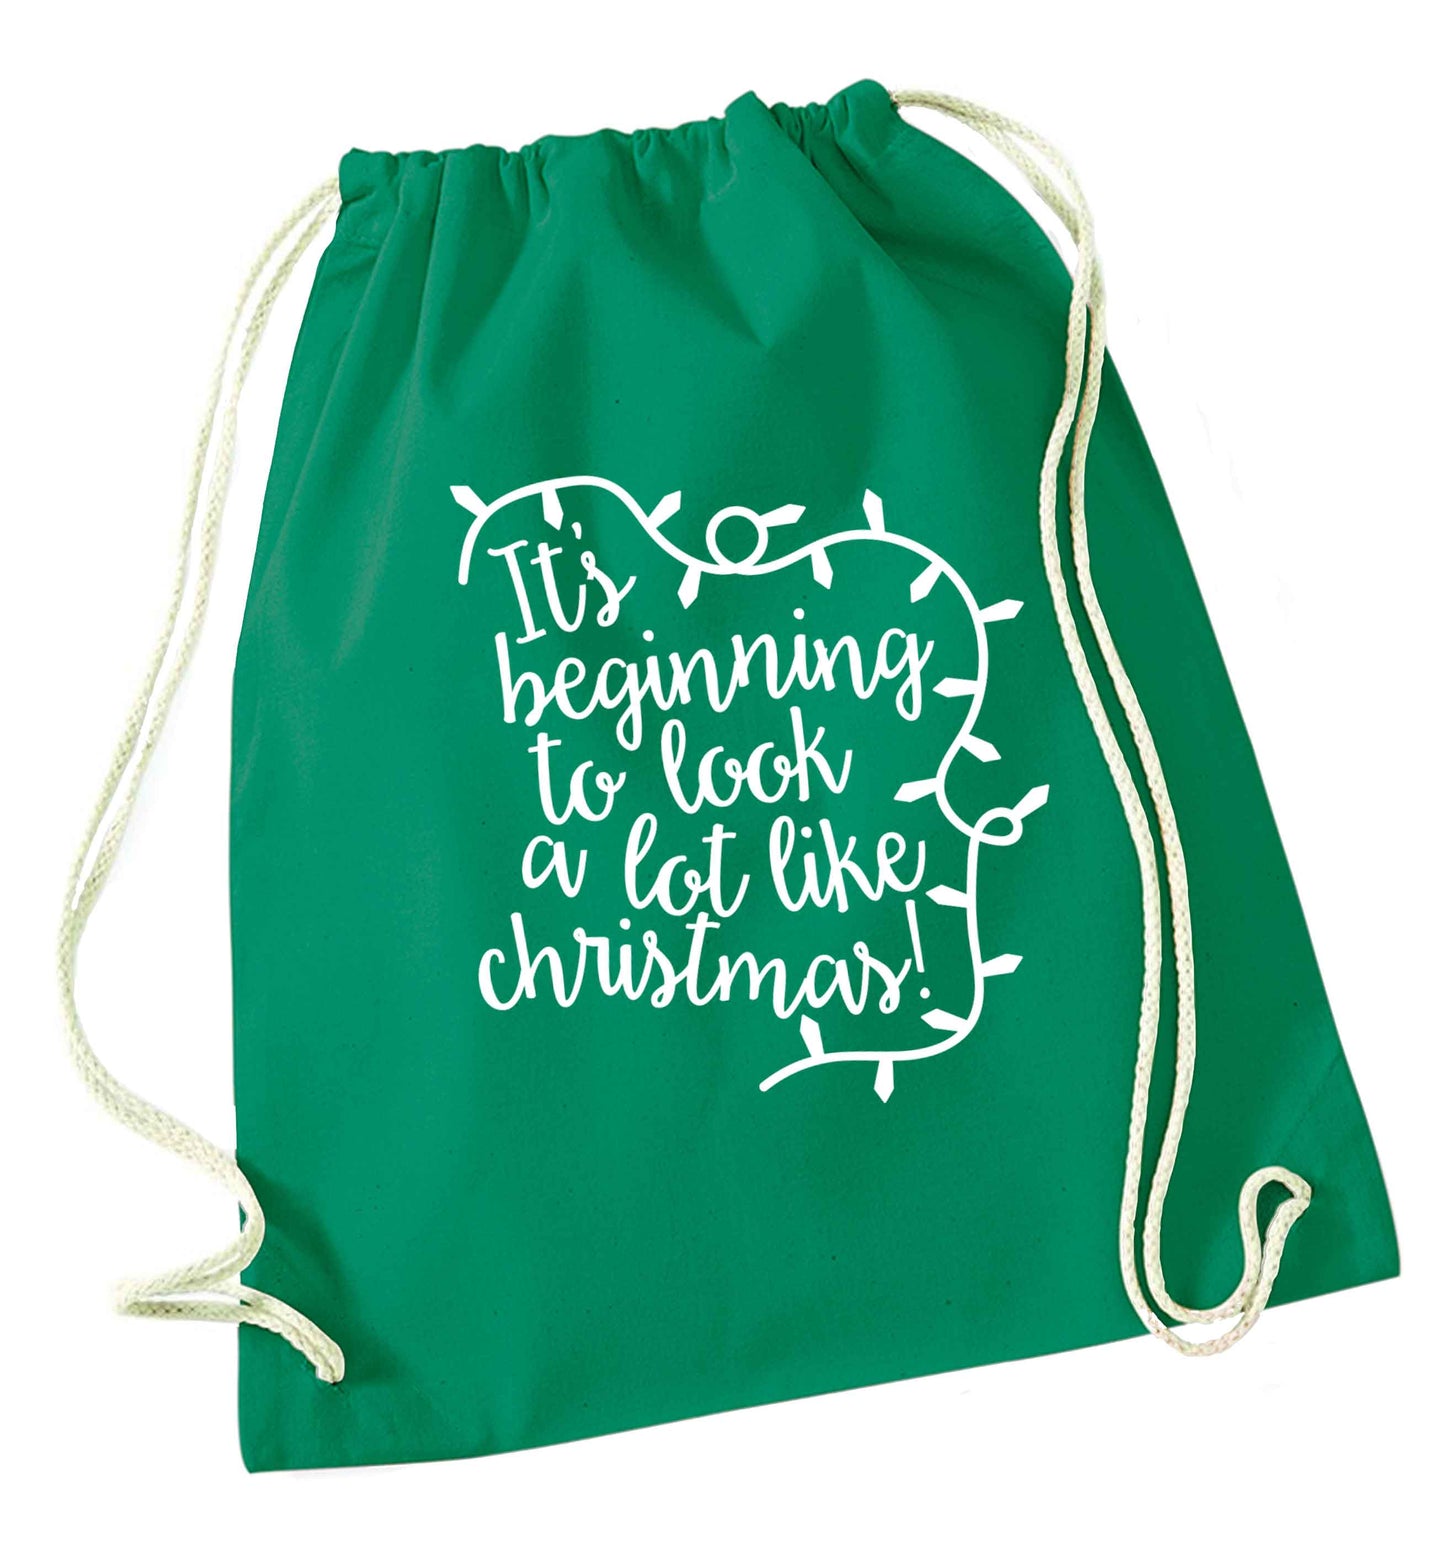 It's beginning to look a lot like Christmas green drawstring bag